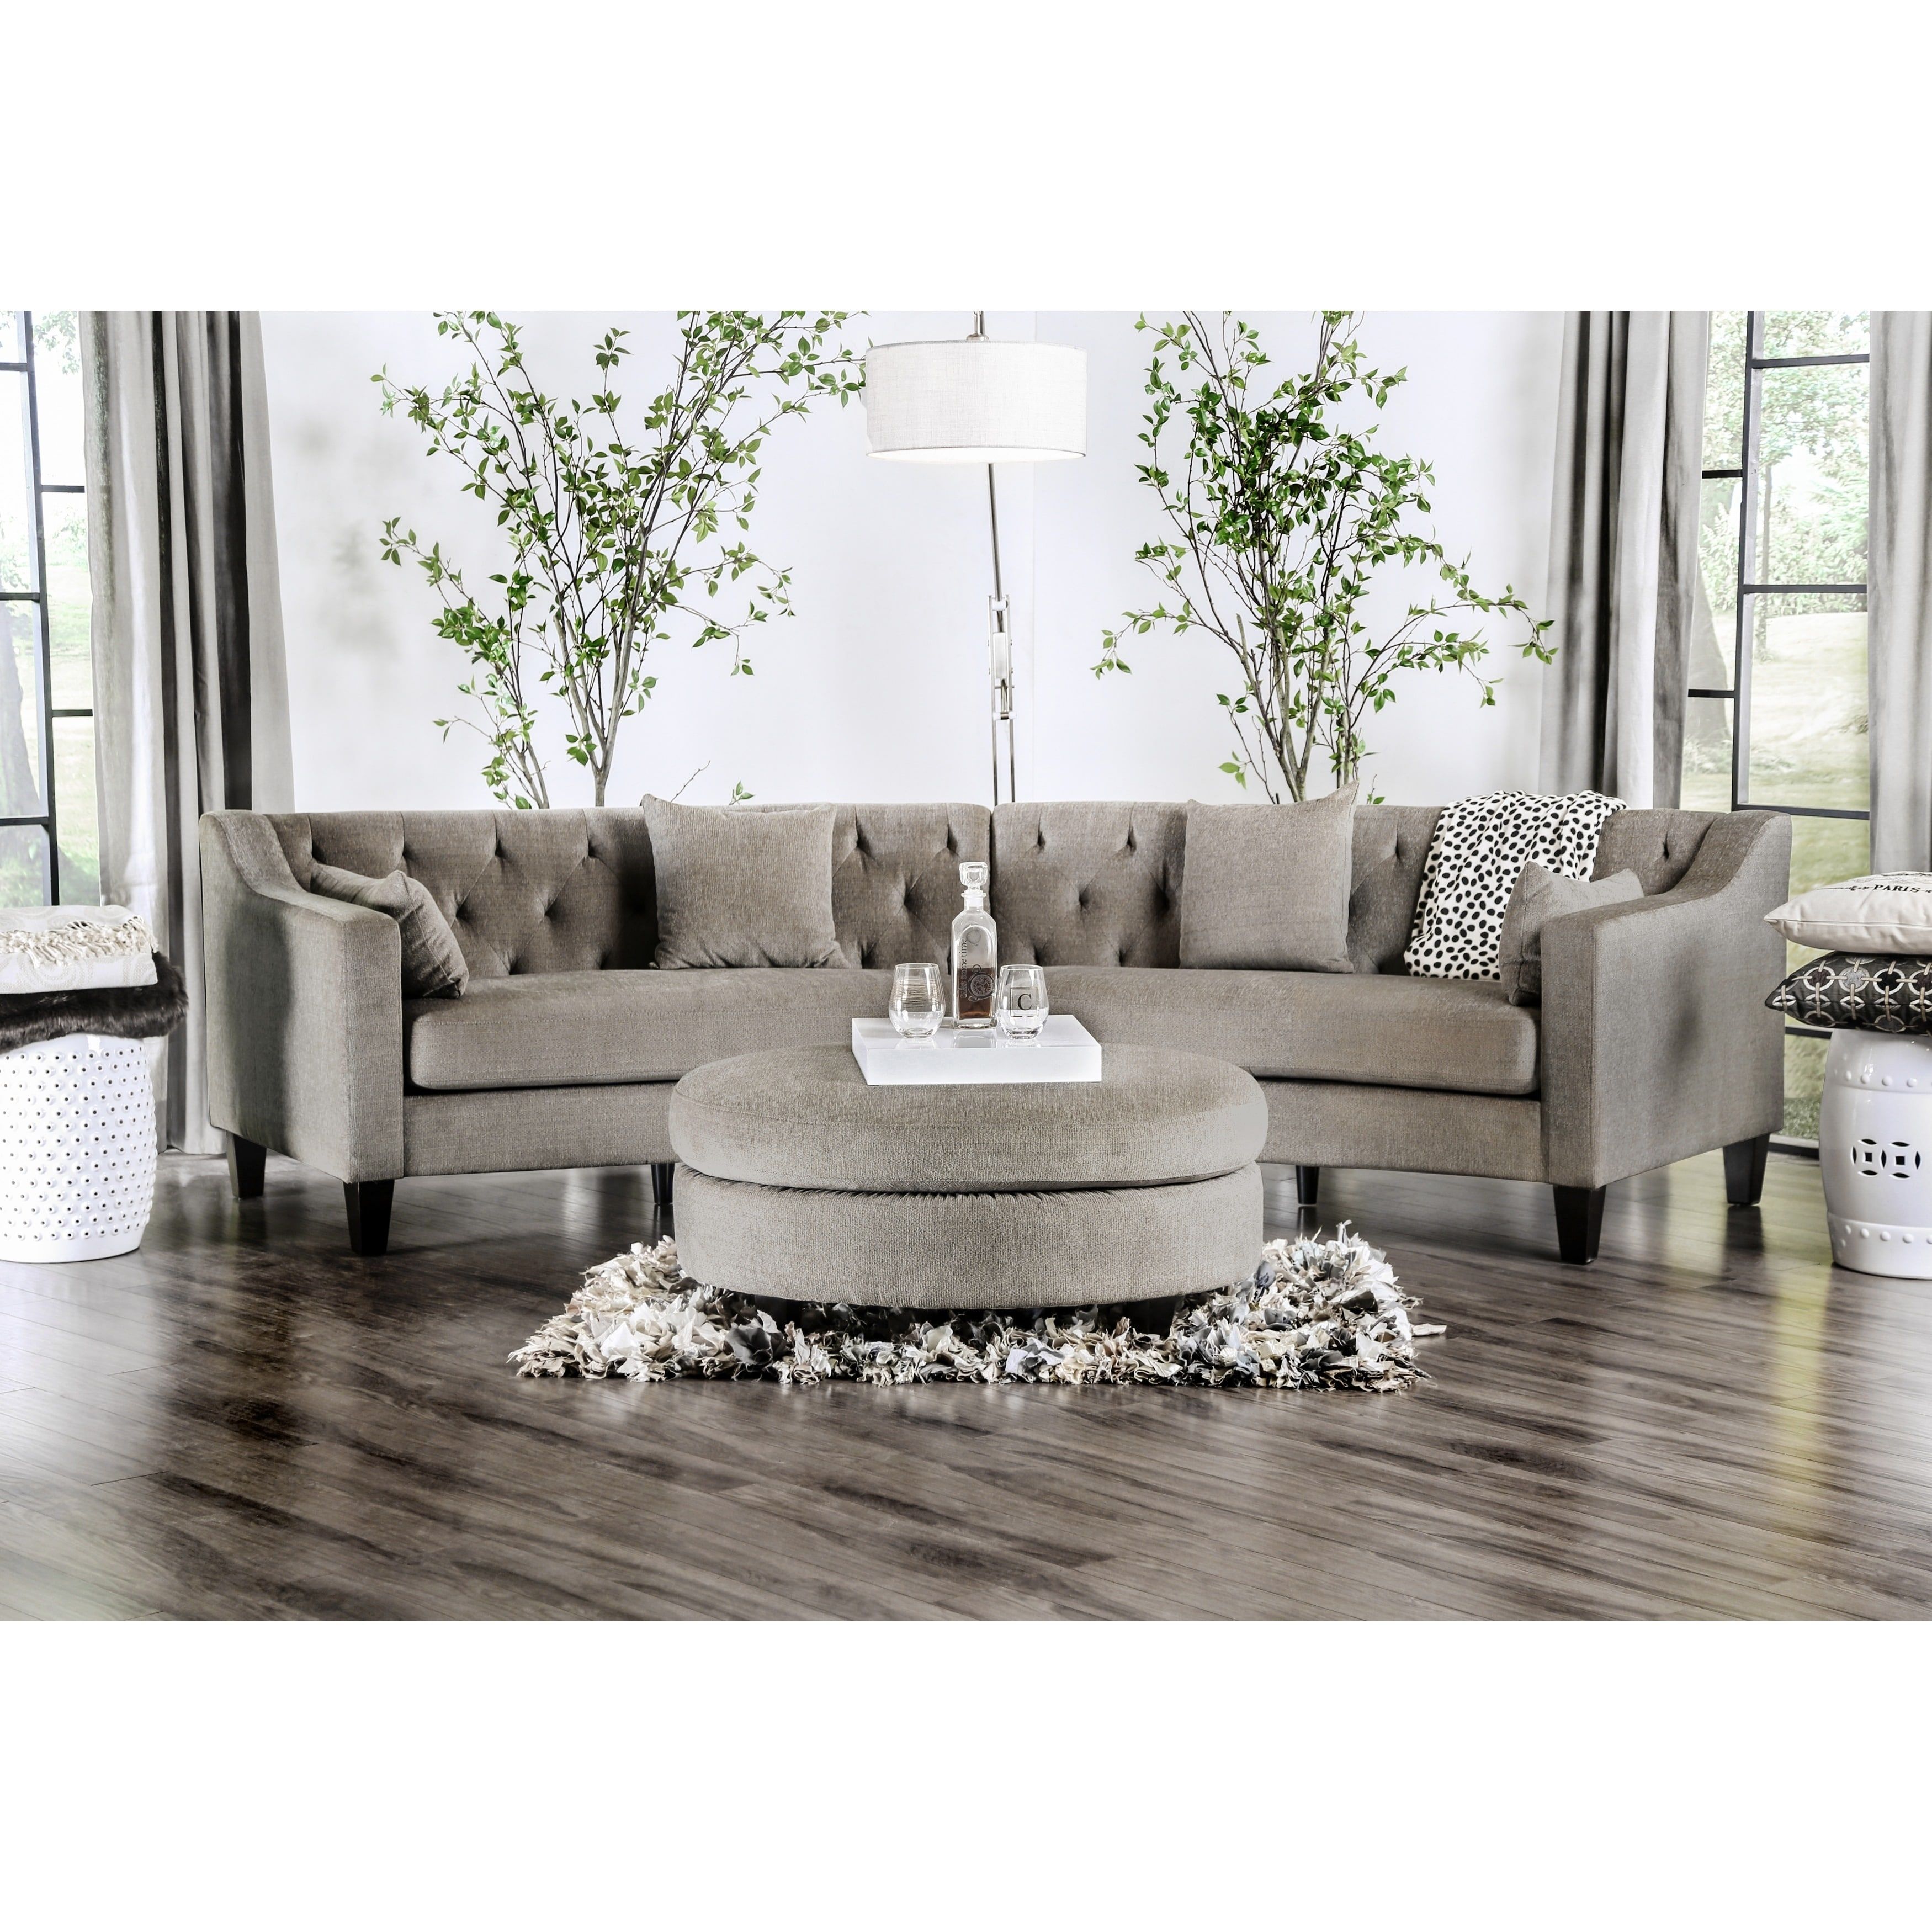 Shop Aretha Contemporary Grey Tufted Rounded Sectional Sofa Pertaining To Contemporary Curves Coffee Tables (View 19 of 30)